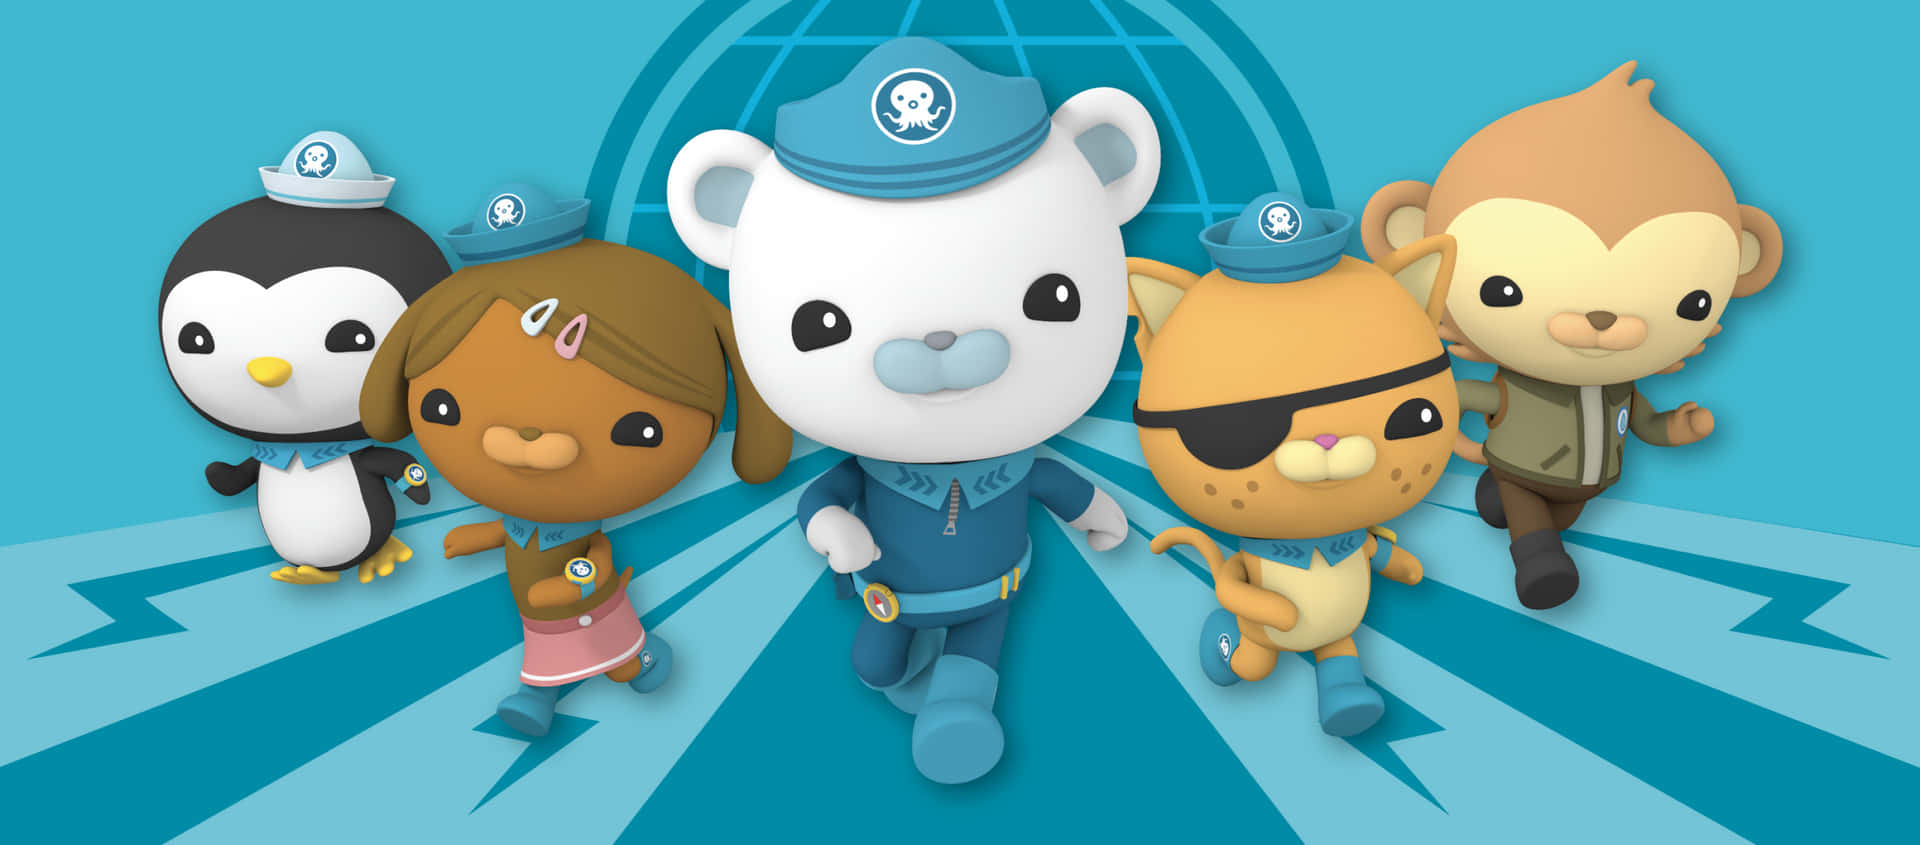 Meomi  The Octonauts  The Great Ghost Reef  Octonauts Cute wallpapers  Cool drawings